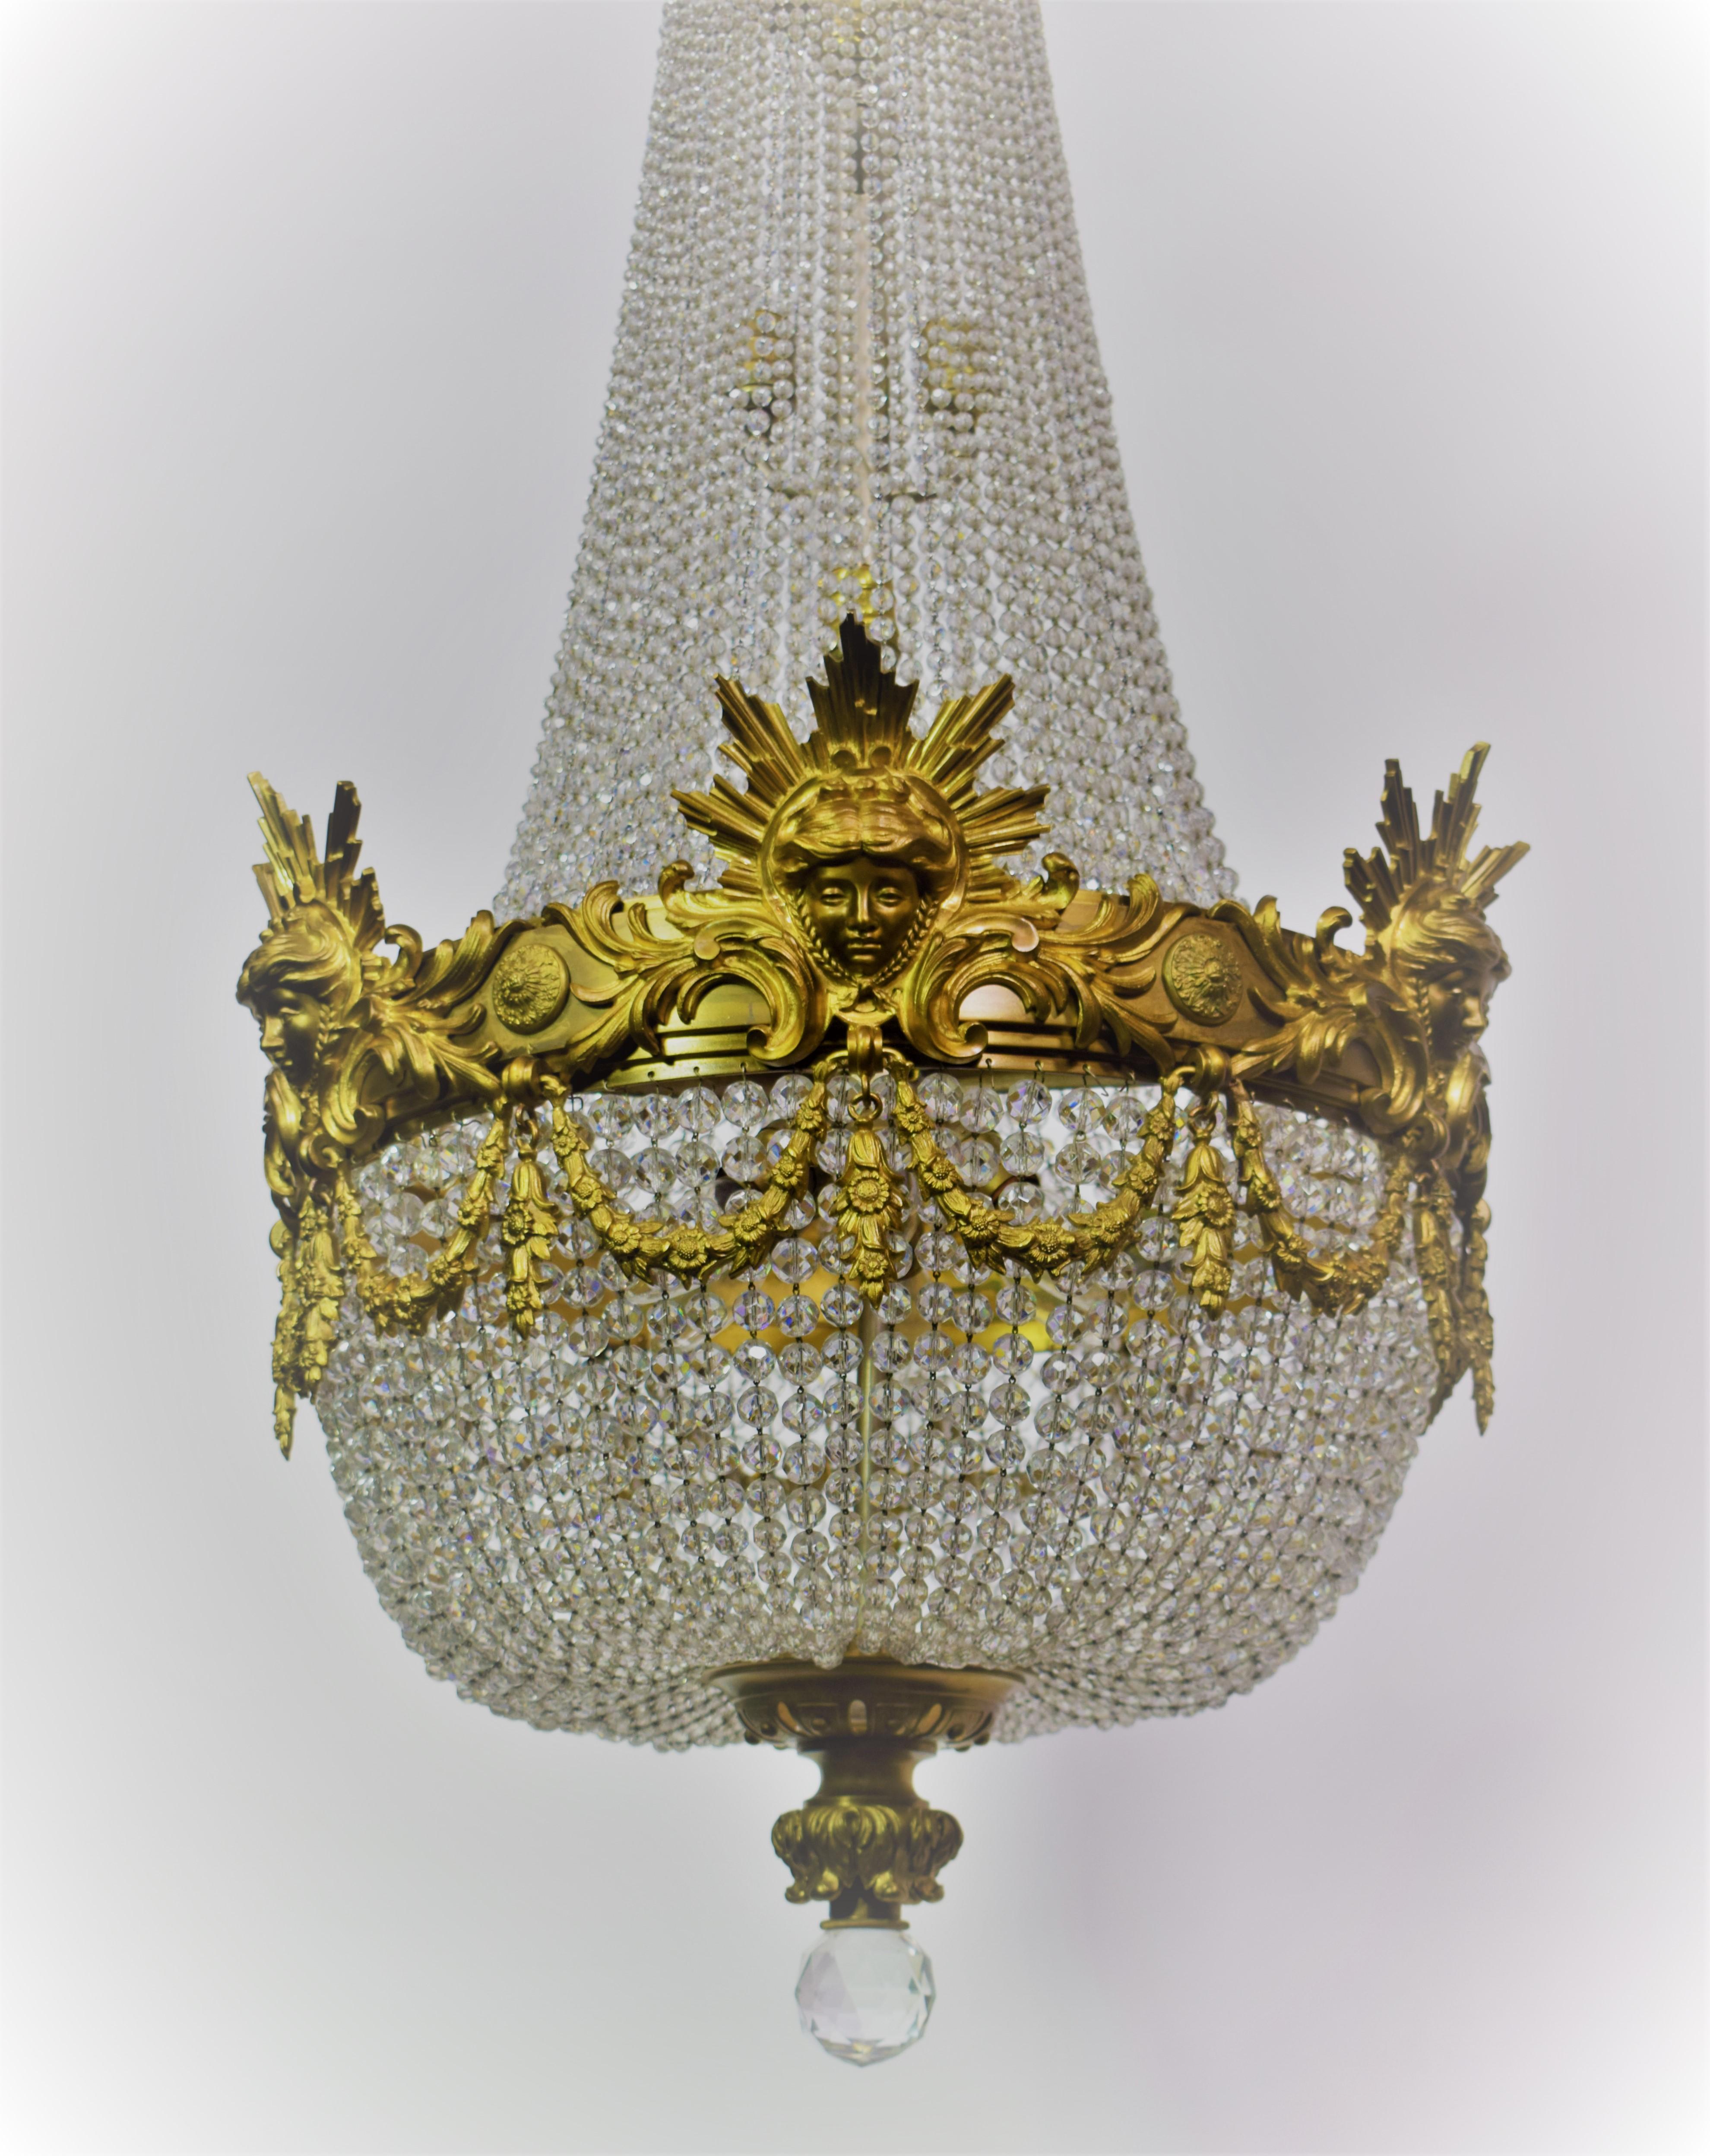 A fine gilt bronze and crystal basket style chandelier by Baccarat. Main ring featuring Sunburst masks of Apollo. Highly important crown. Pierced bottom finial featuring handcut ball. France, circa 1900. Fourteen lights (Six in the